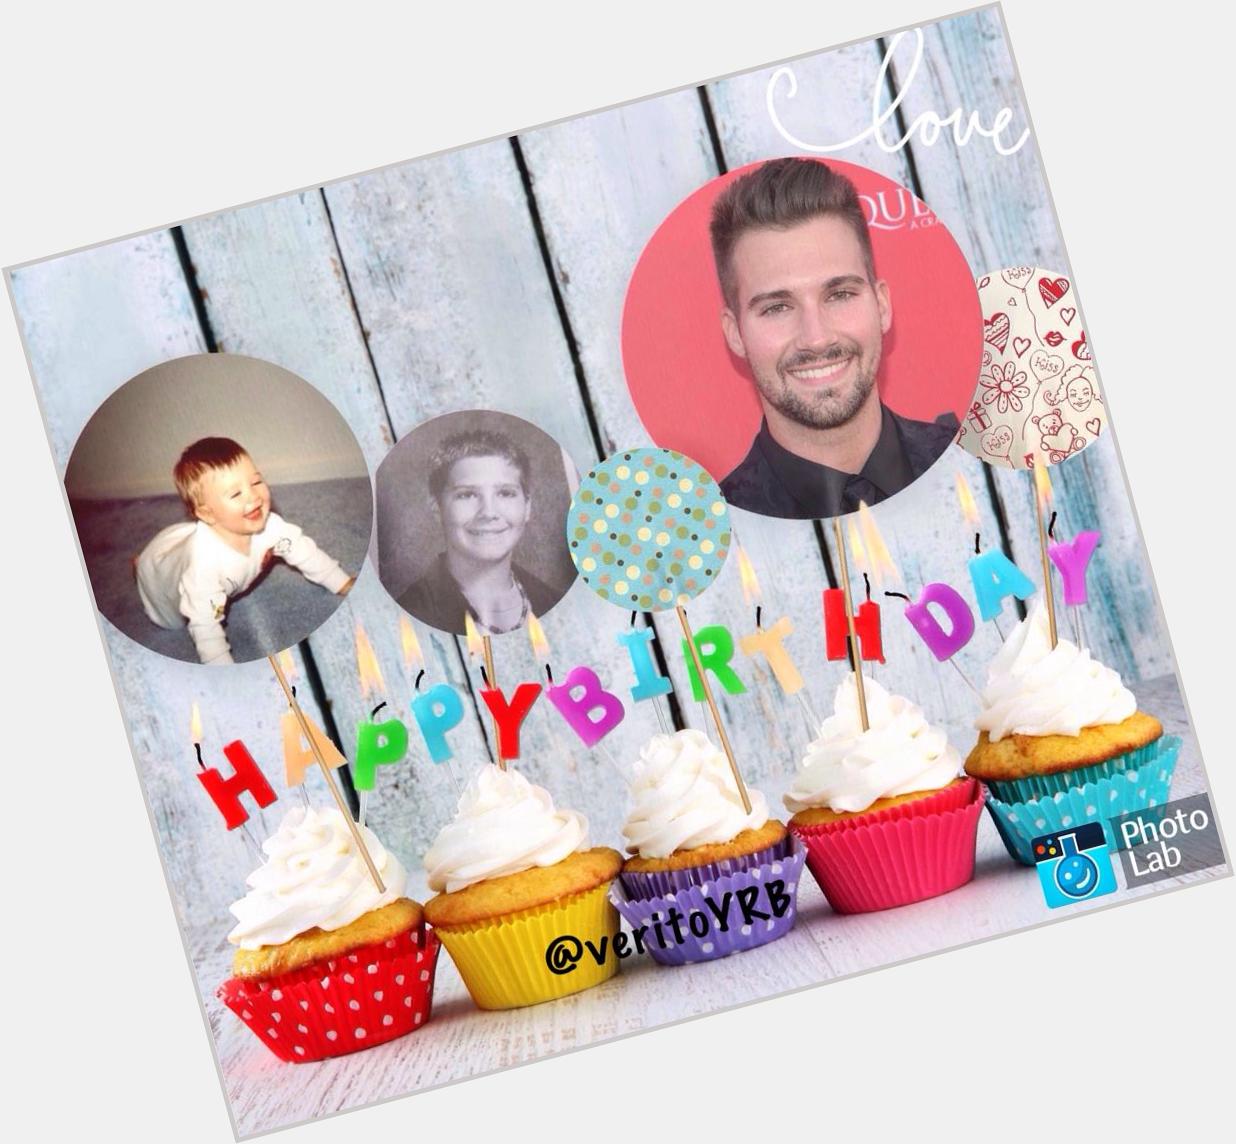 HAPPY BIRTHDAY JAMES MASLOW, I LOVE YOU, 
FROM: TO: 